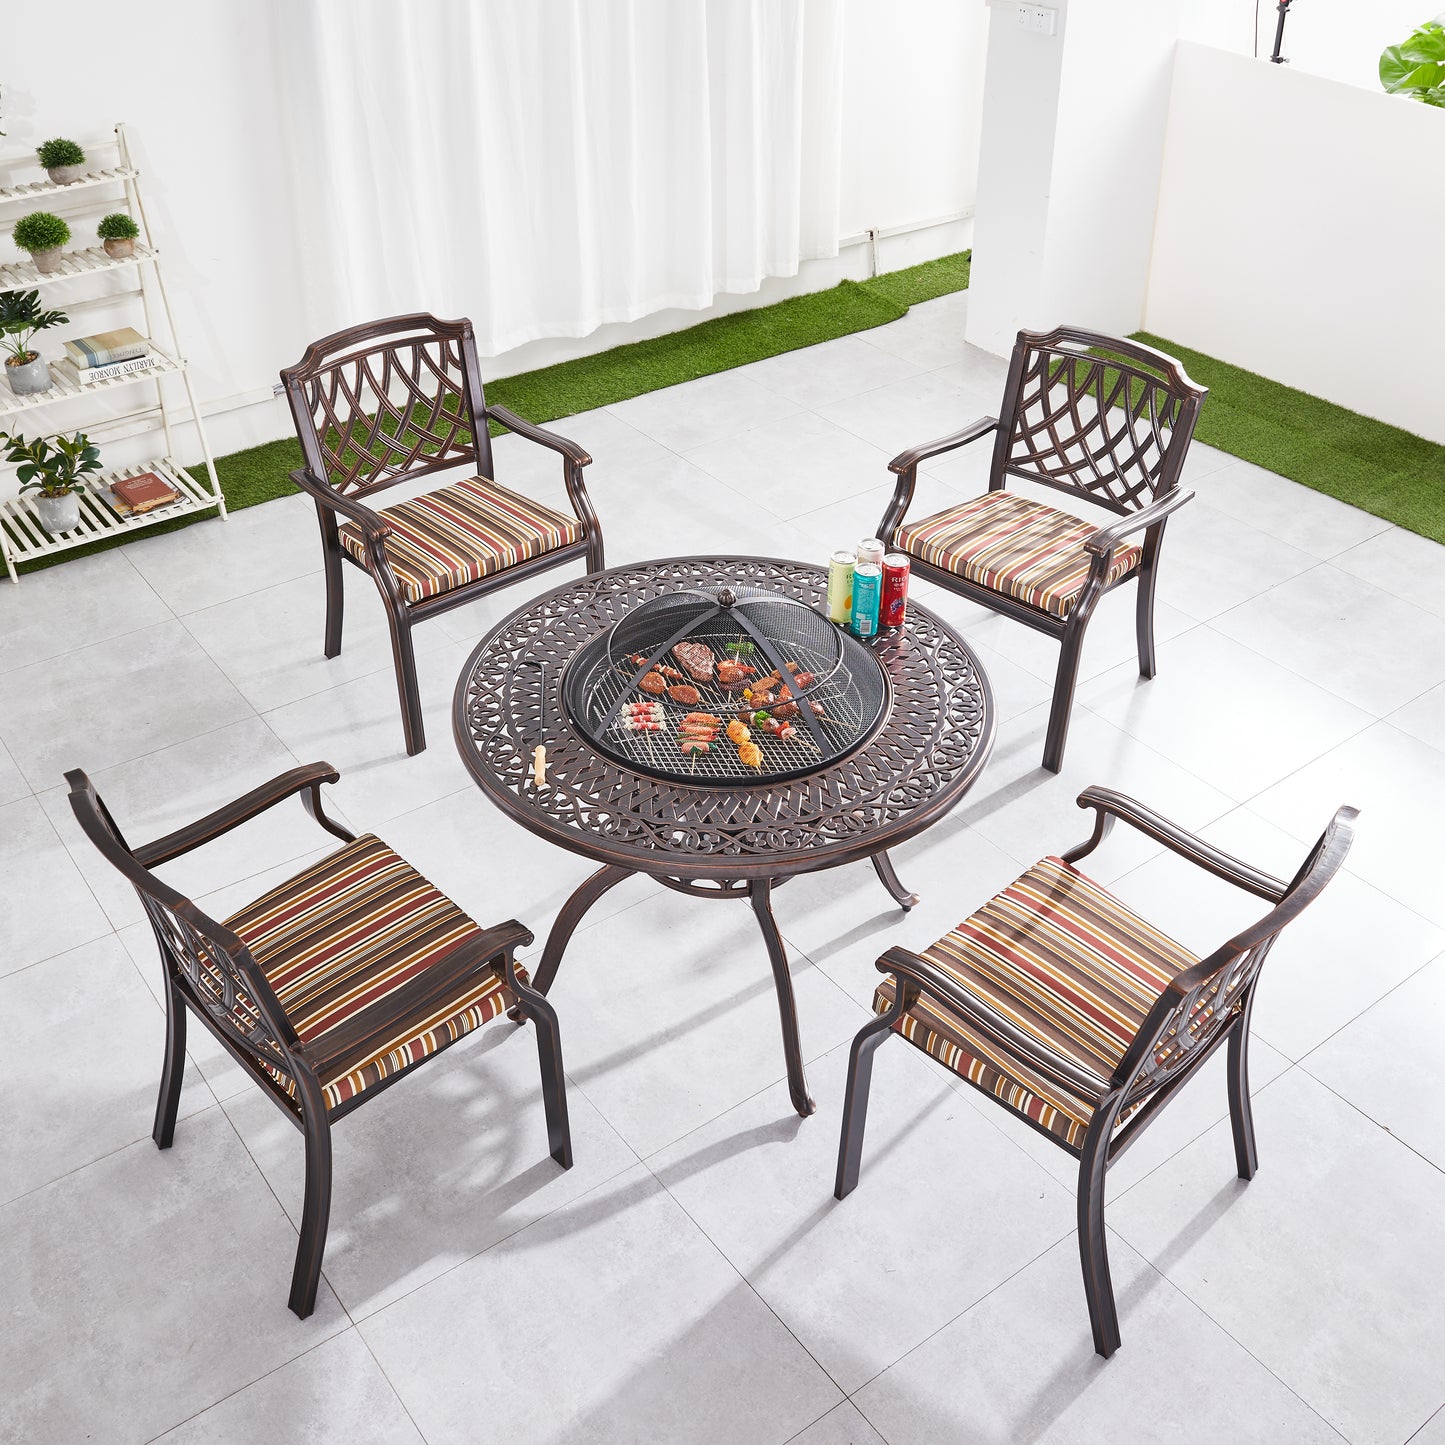 Barbecue Set - Model No. KP-ZF6079T, Outdoor Furniture Sets